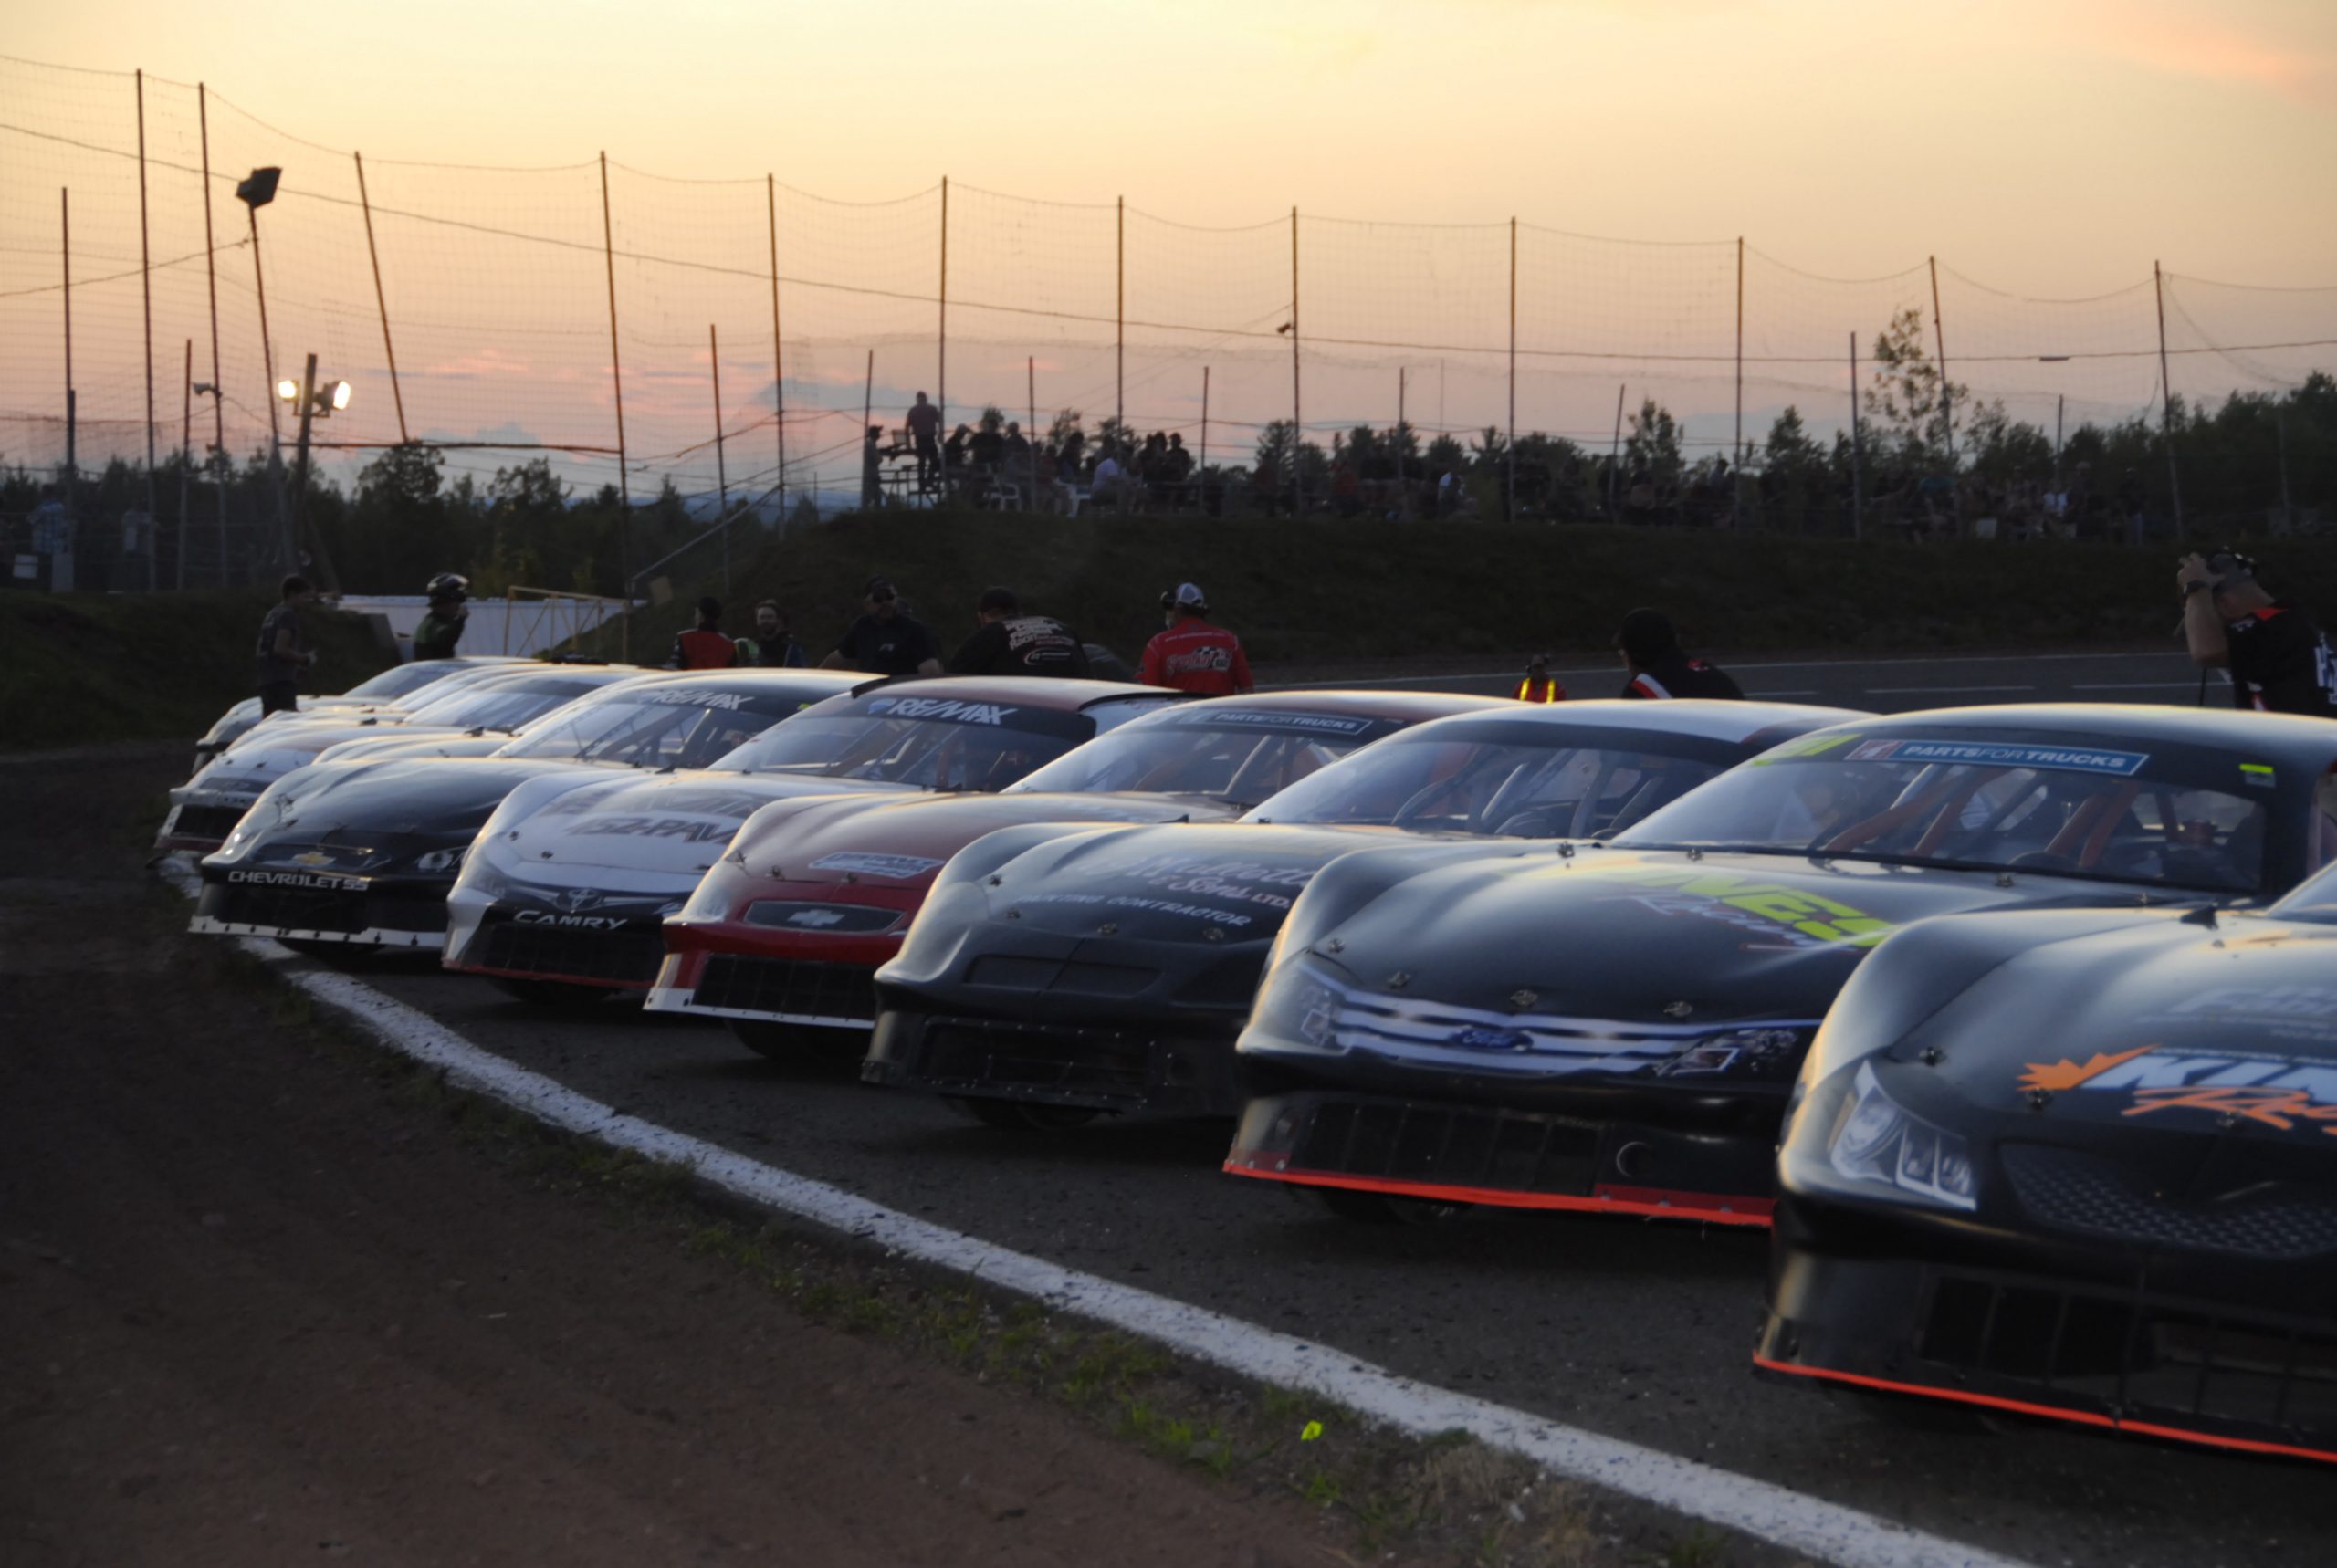 RE/MAX EAST COAST ELITE REALTY 250 ENTRY LIST GROWS TO OVER TWO DOZEN CARS